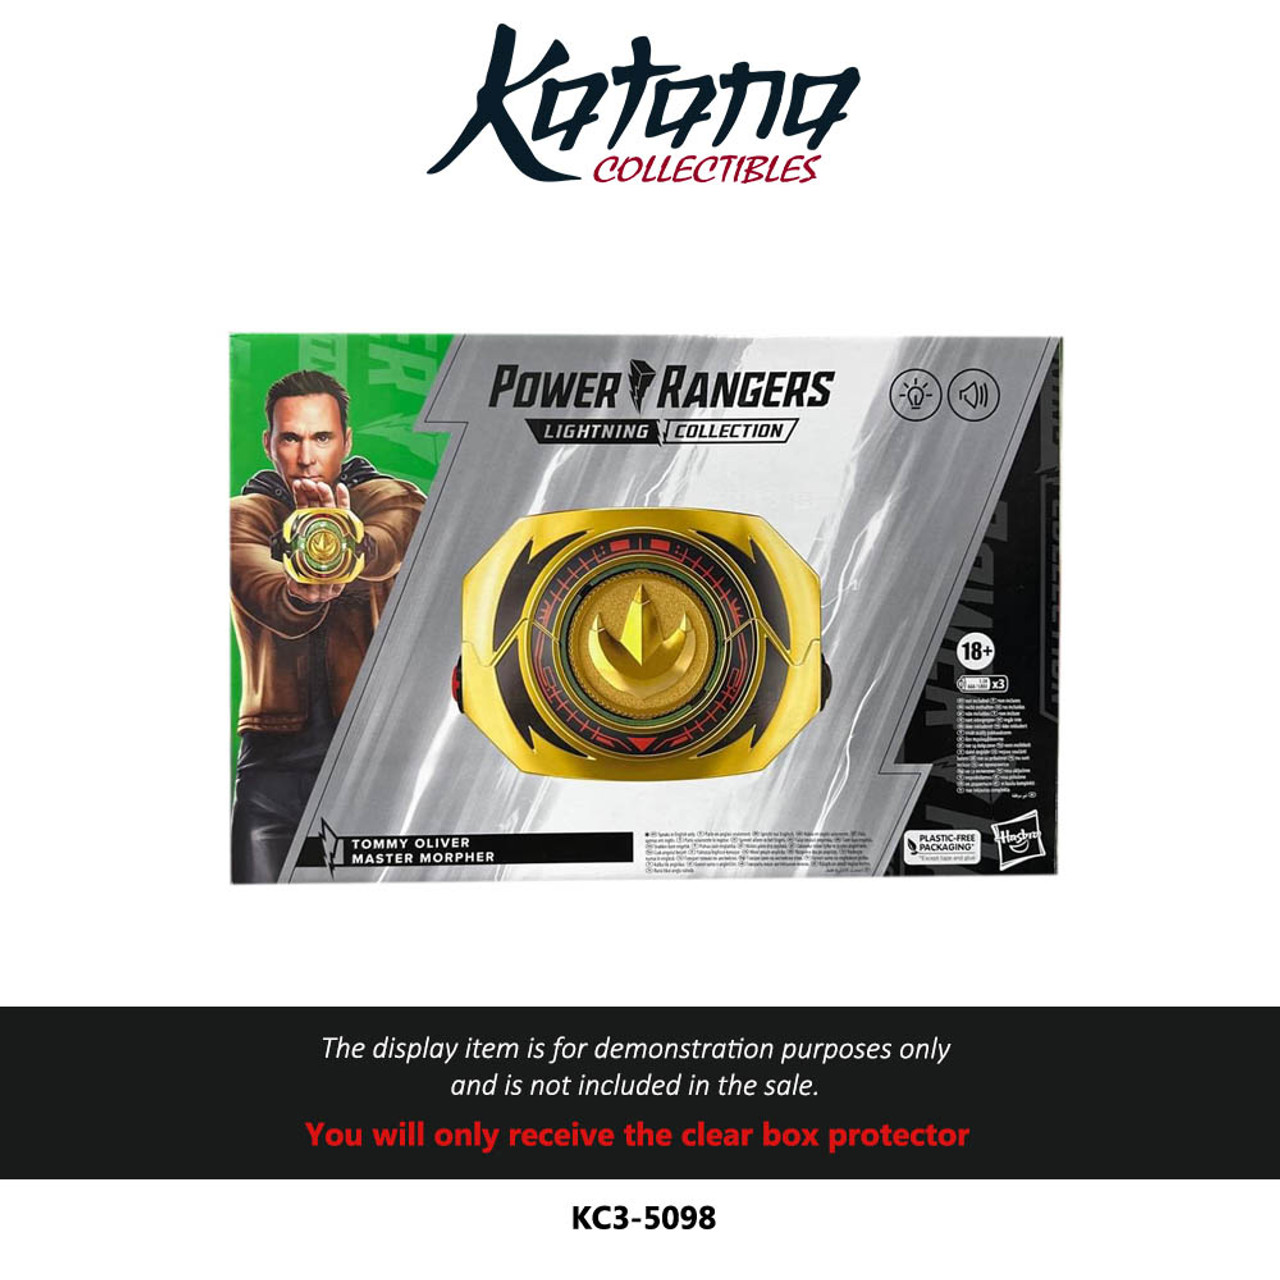 Katana Collectibles Protector For Power Rangers Lightning Collection Master Morpher